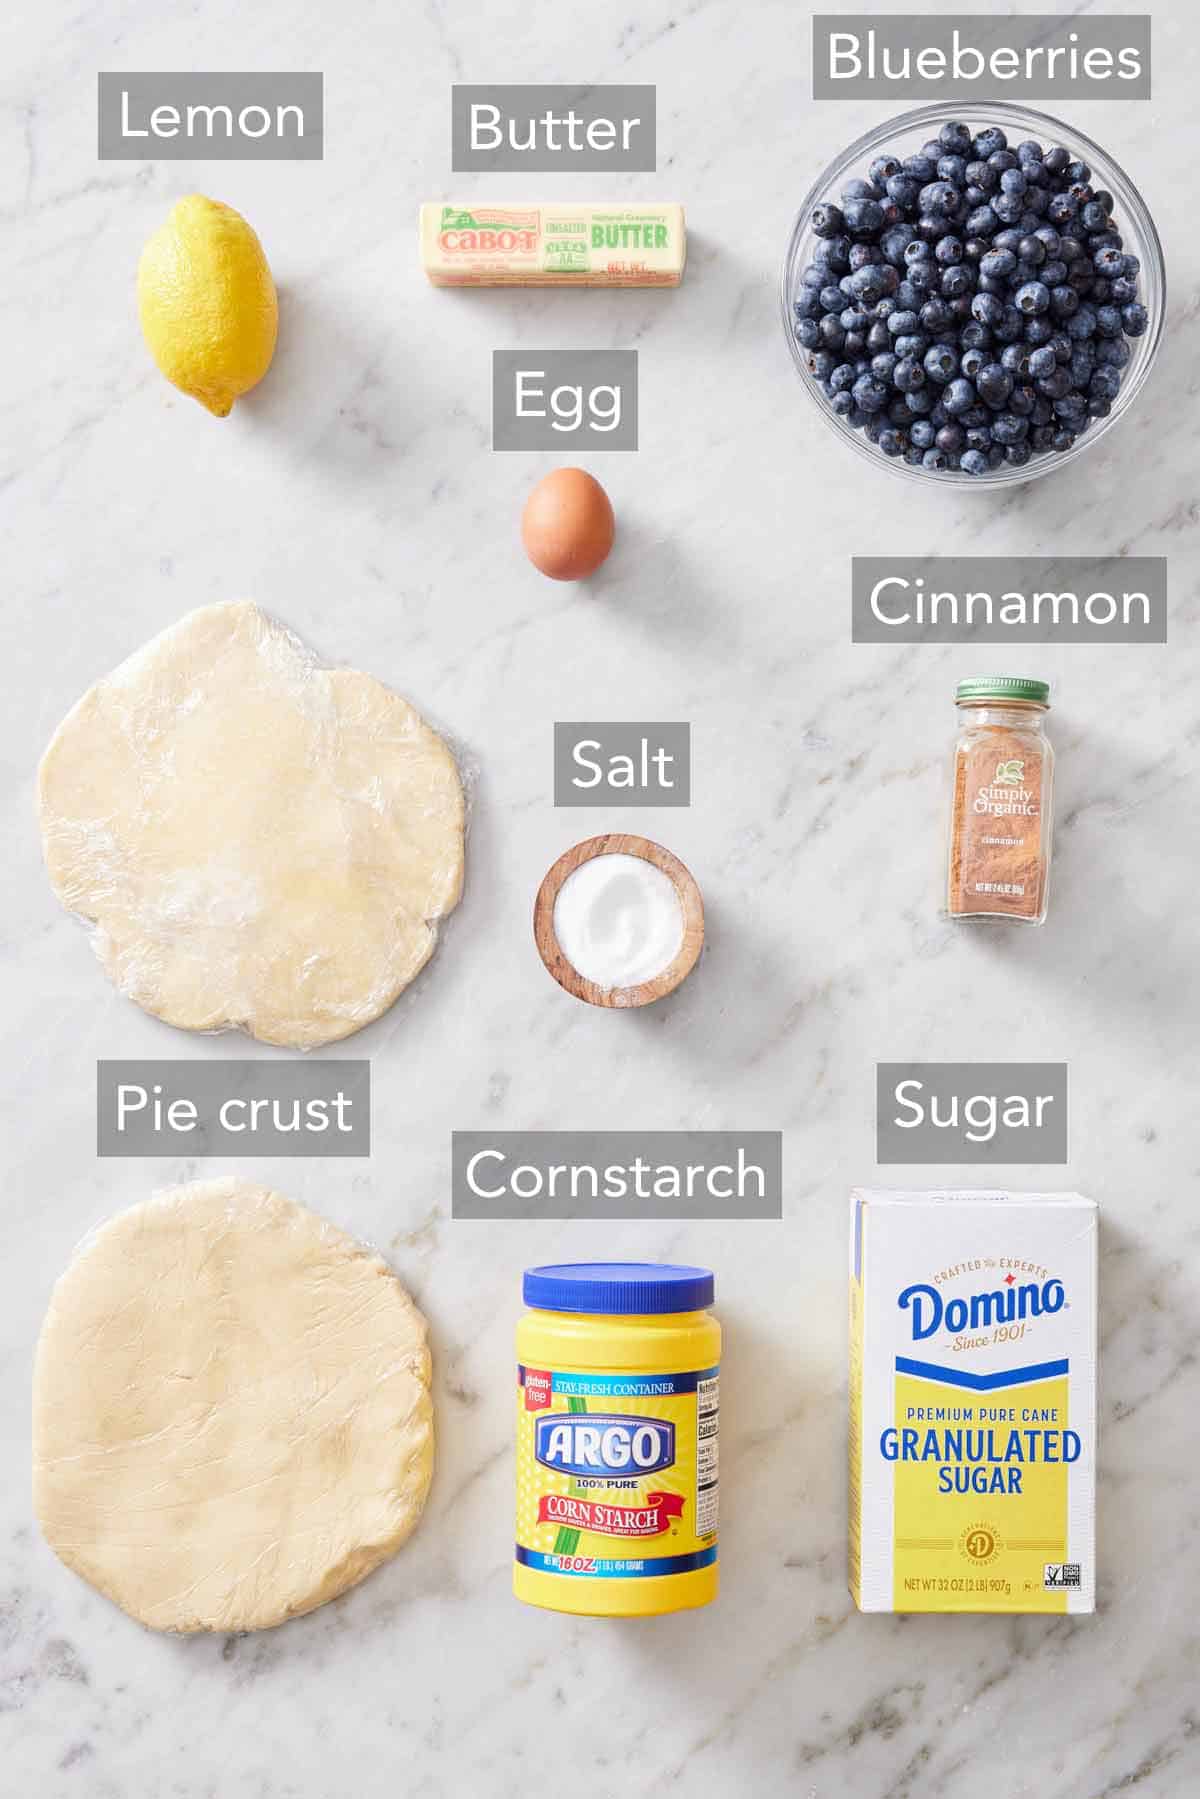 Ingredients needed to make blueberry pie.